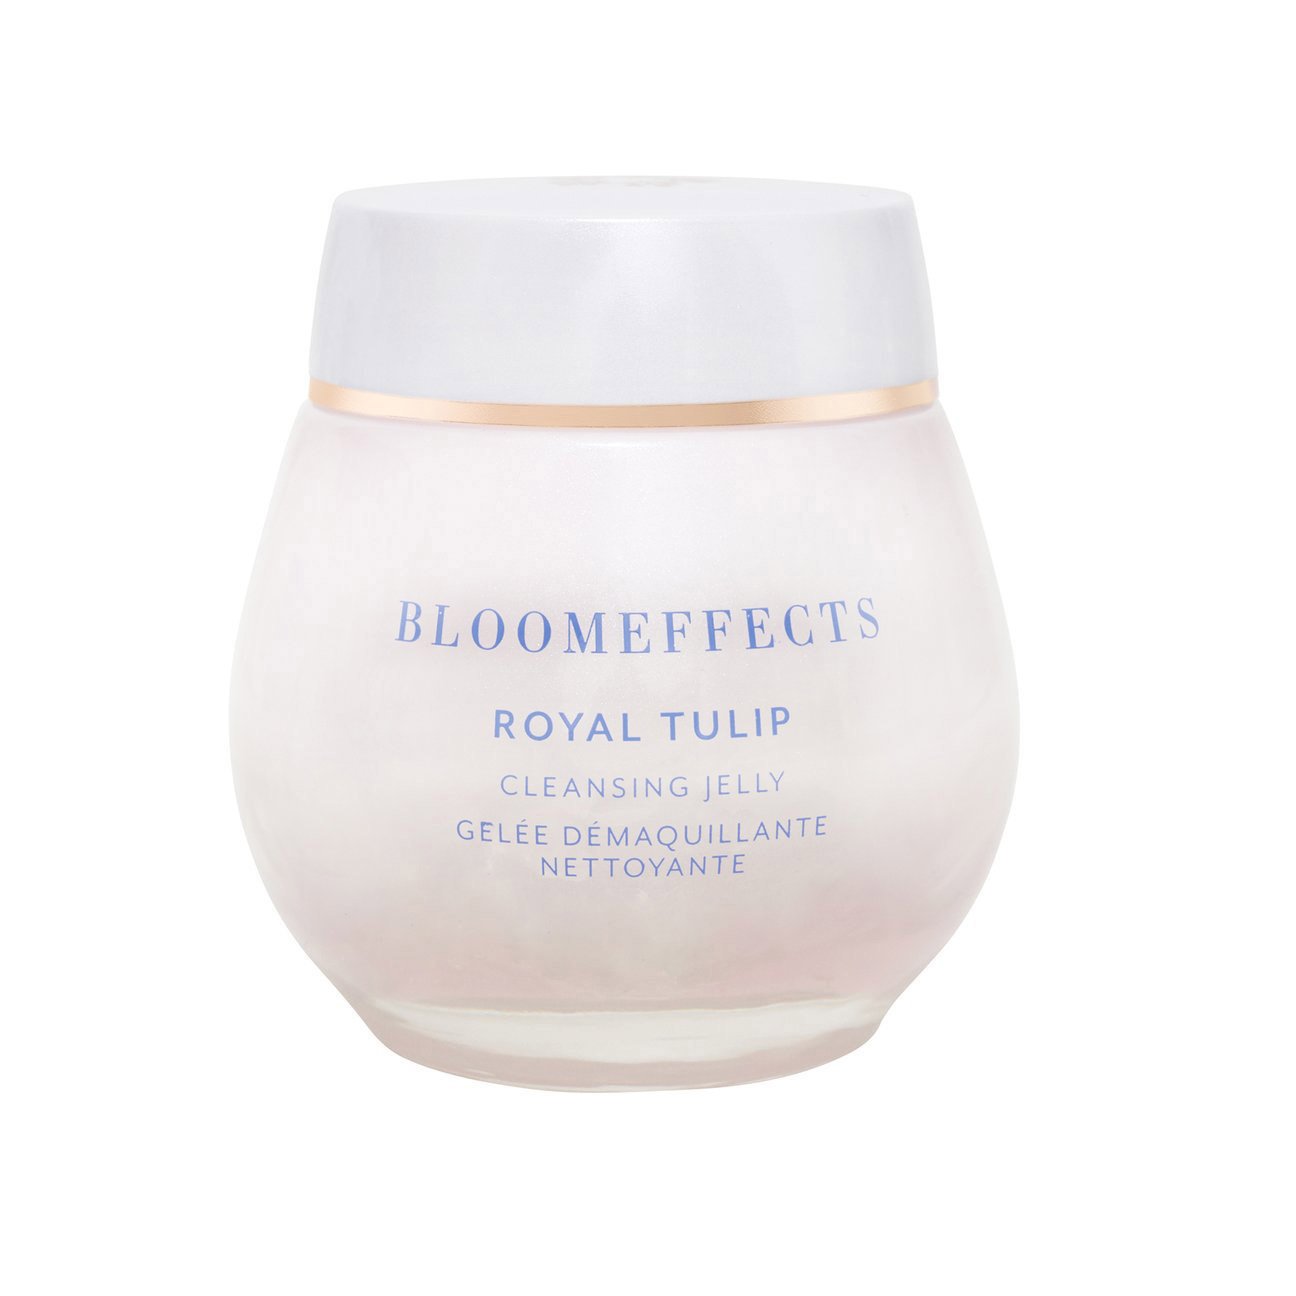 Bloomeffects royal tulip cleansing jelly sustainable beauty award winner